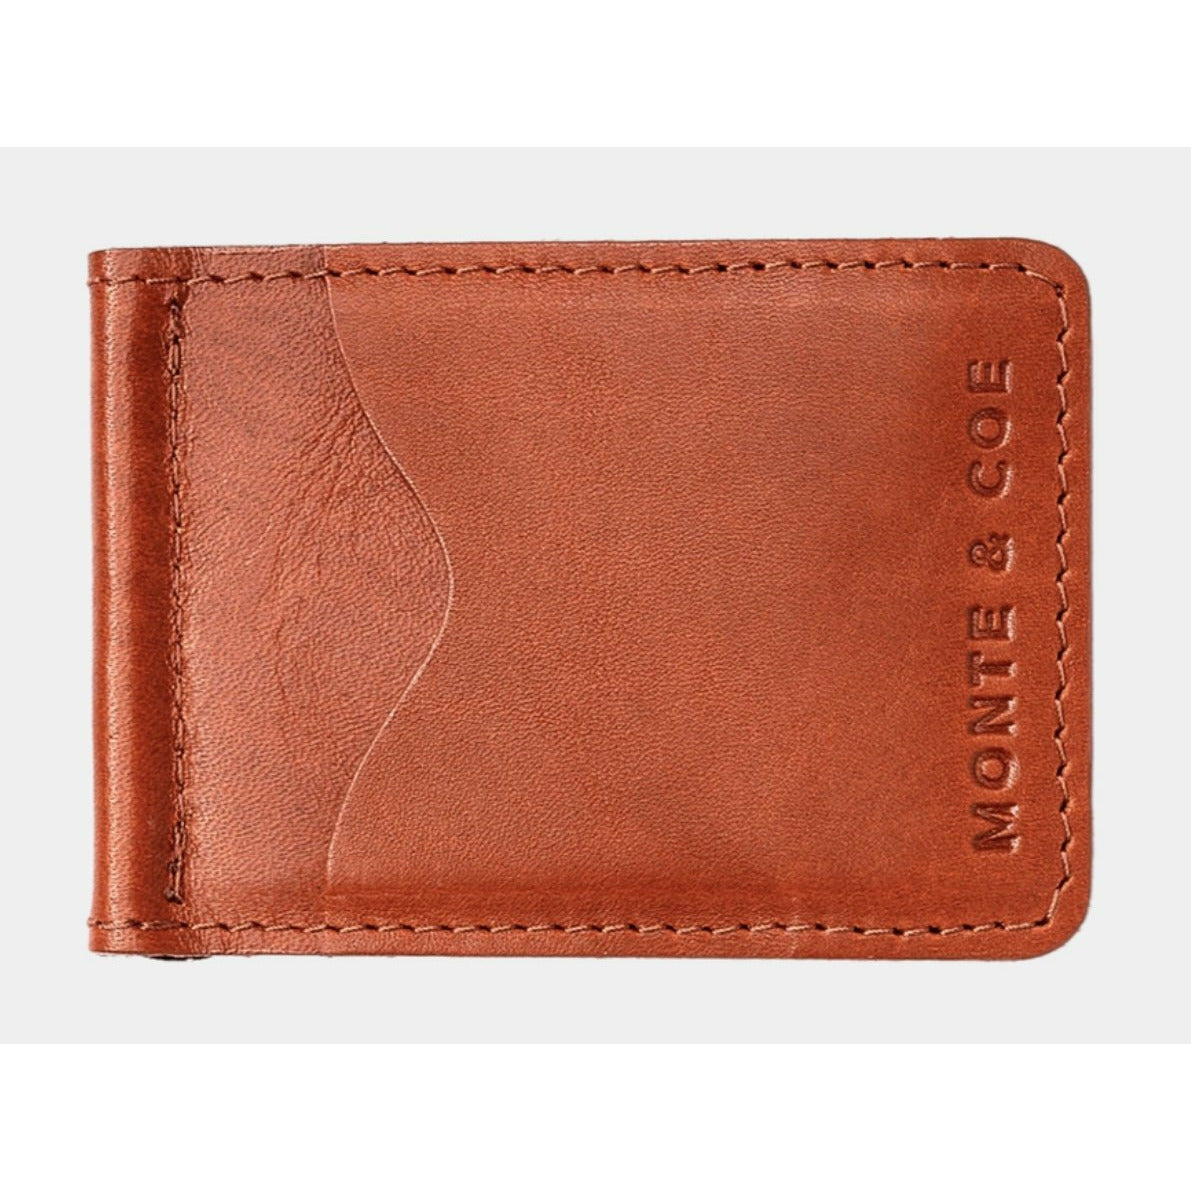 MONTE & COE slim leather wallet with money clip